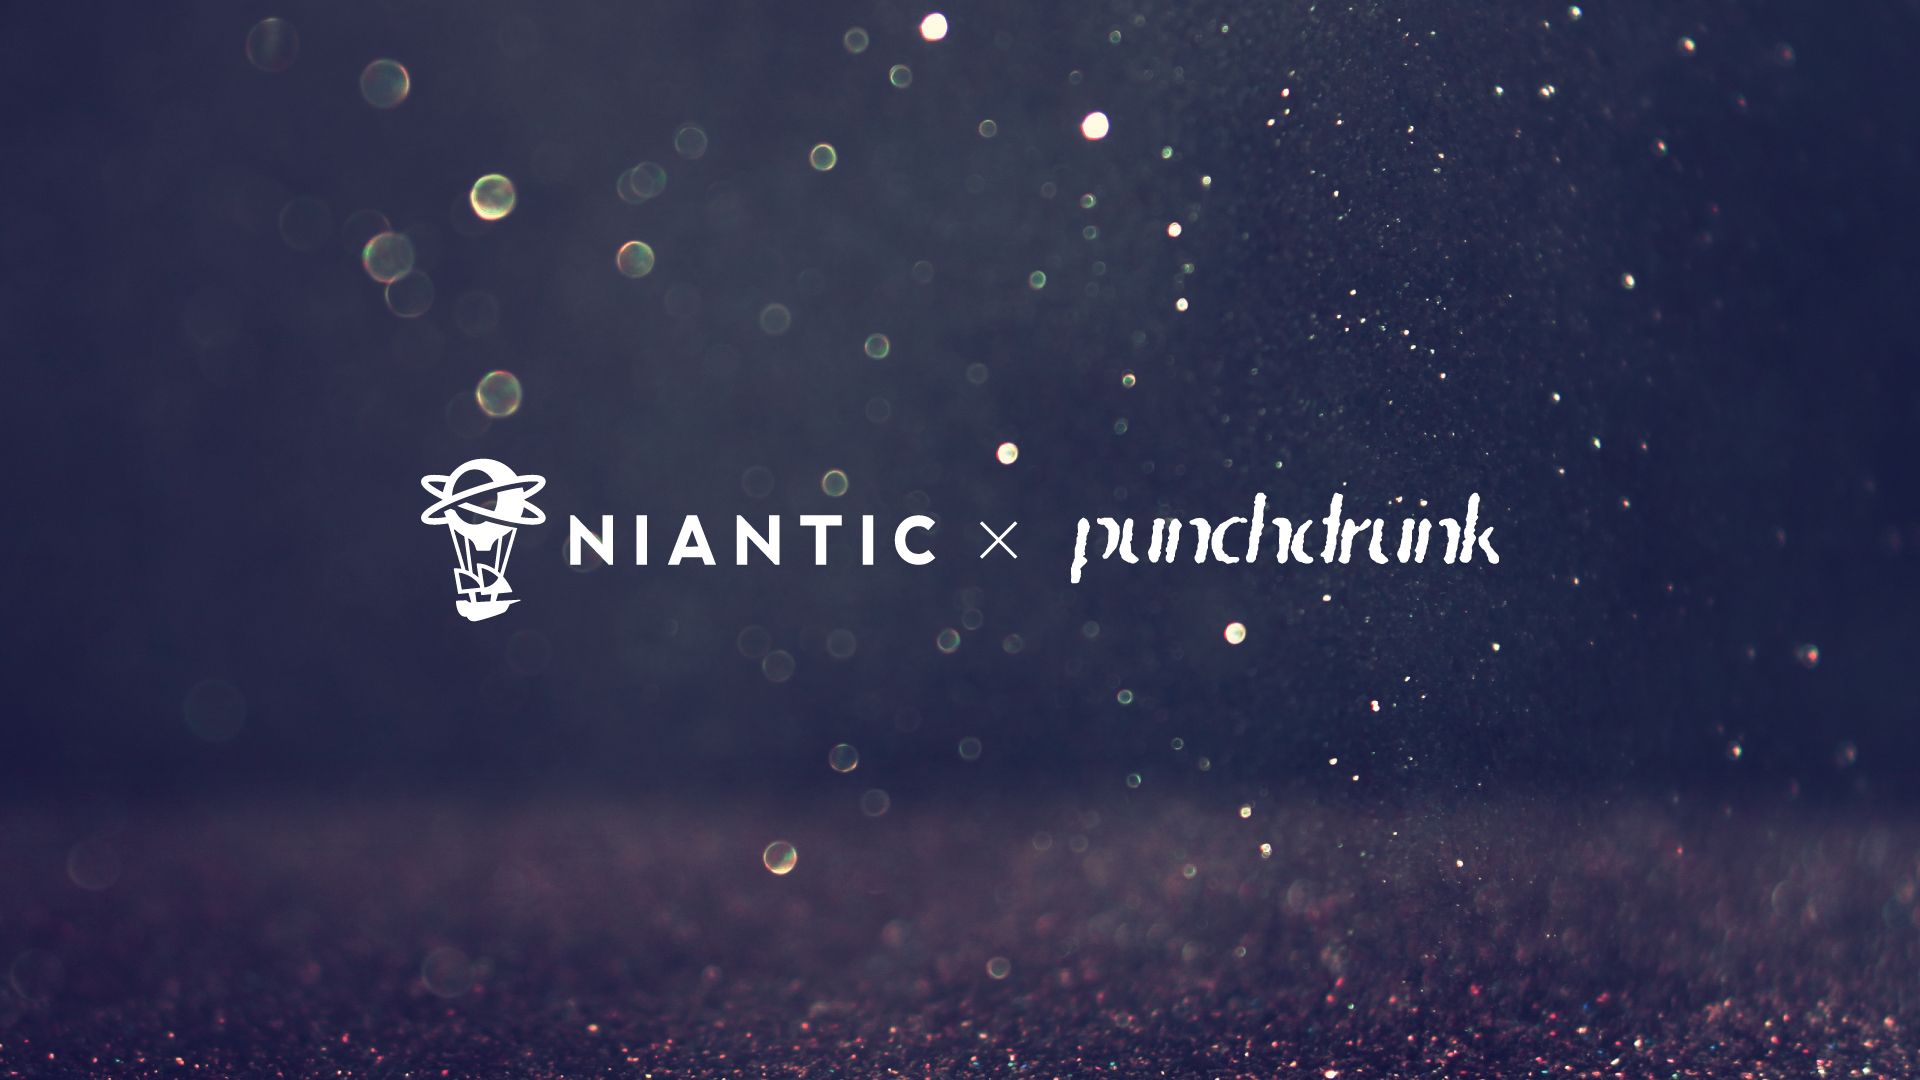 A logo for the Niantic/Punchdrunk partnership